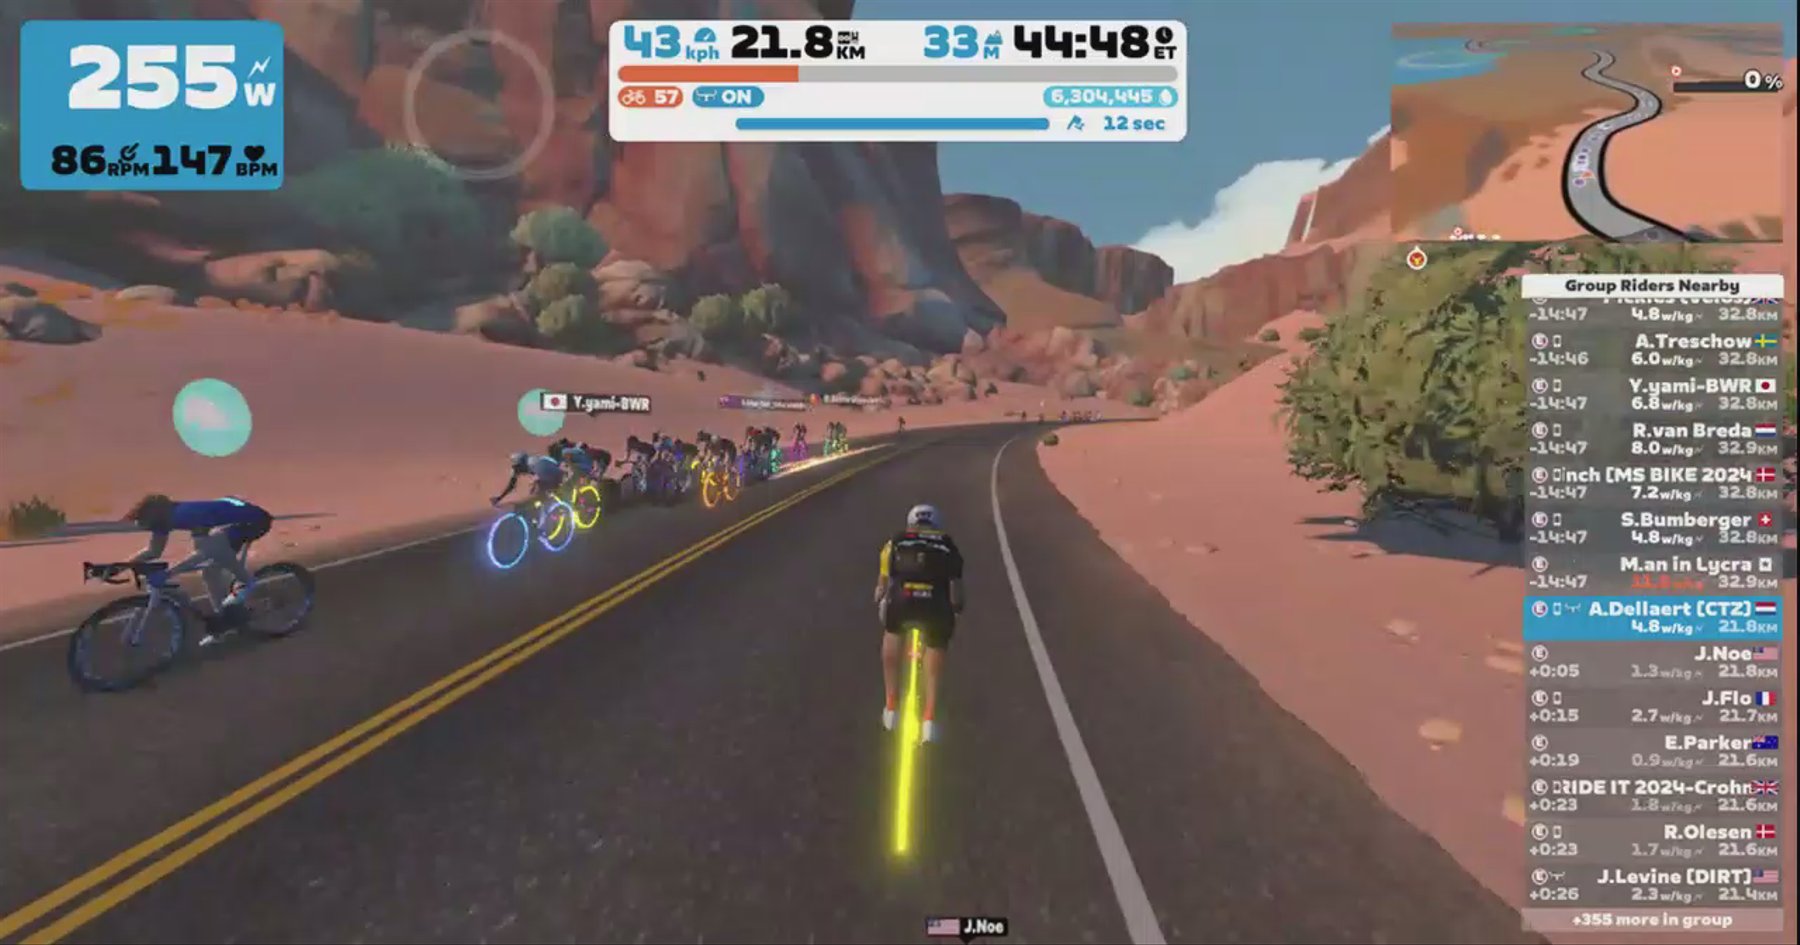 Zwift - Group Ride: The XP Express on Tempus Fugit in Watopia